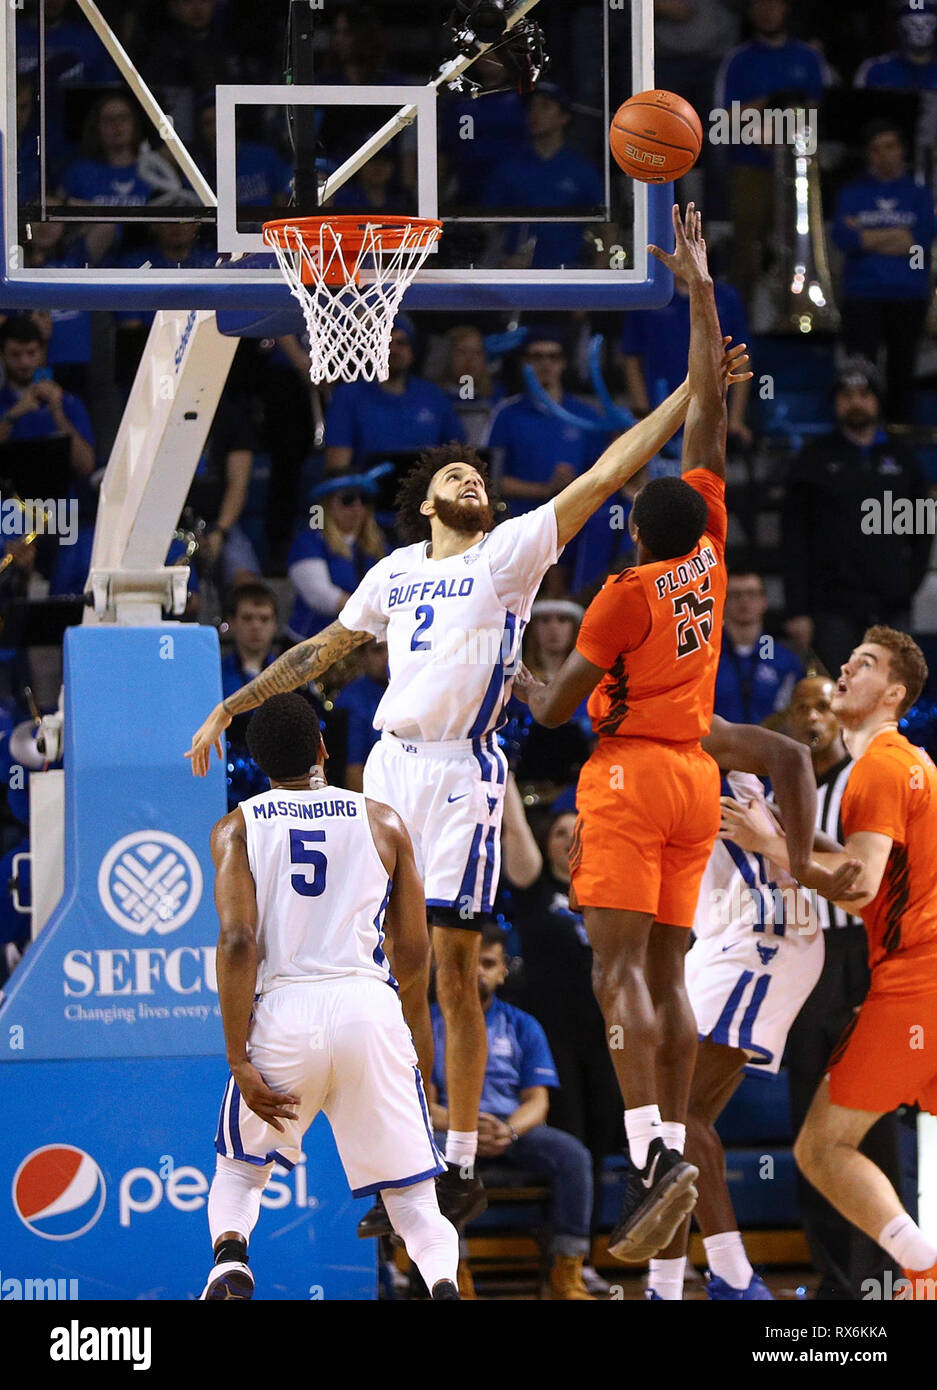 New York, USA. 8th Mar 2019. Mar 08, 2019: Buffalo Bulls guard Jeremy Harris (2) looks to block a shot by Bowling Green Falcons forward Daeqwon Plowden (25) during the second half of play in the NCAA Basketball game between the Bowling Green Falcons and Buffalo Bulls at Alumni Arena in Amherst, N.Y. (Nicholas T. LoVerde/Cal Sport Media) Credit: Cal Sport Media/Alamy Live News Stock Photo